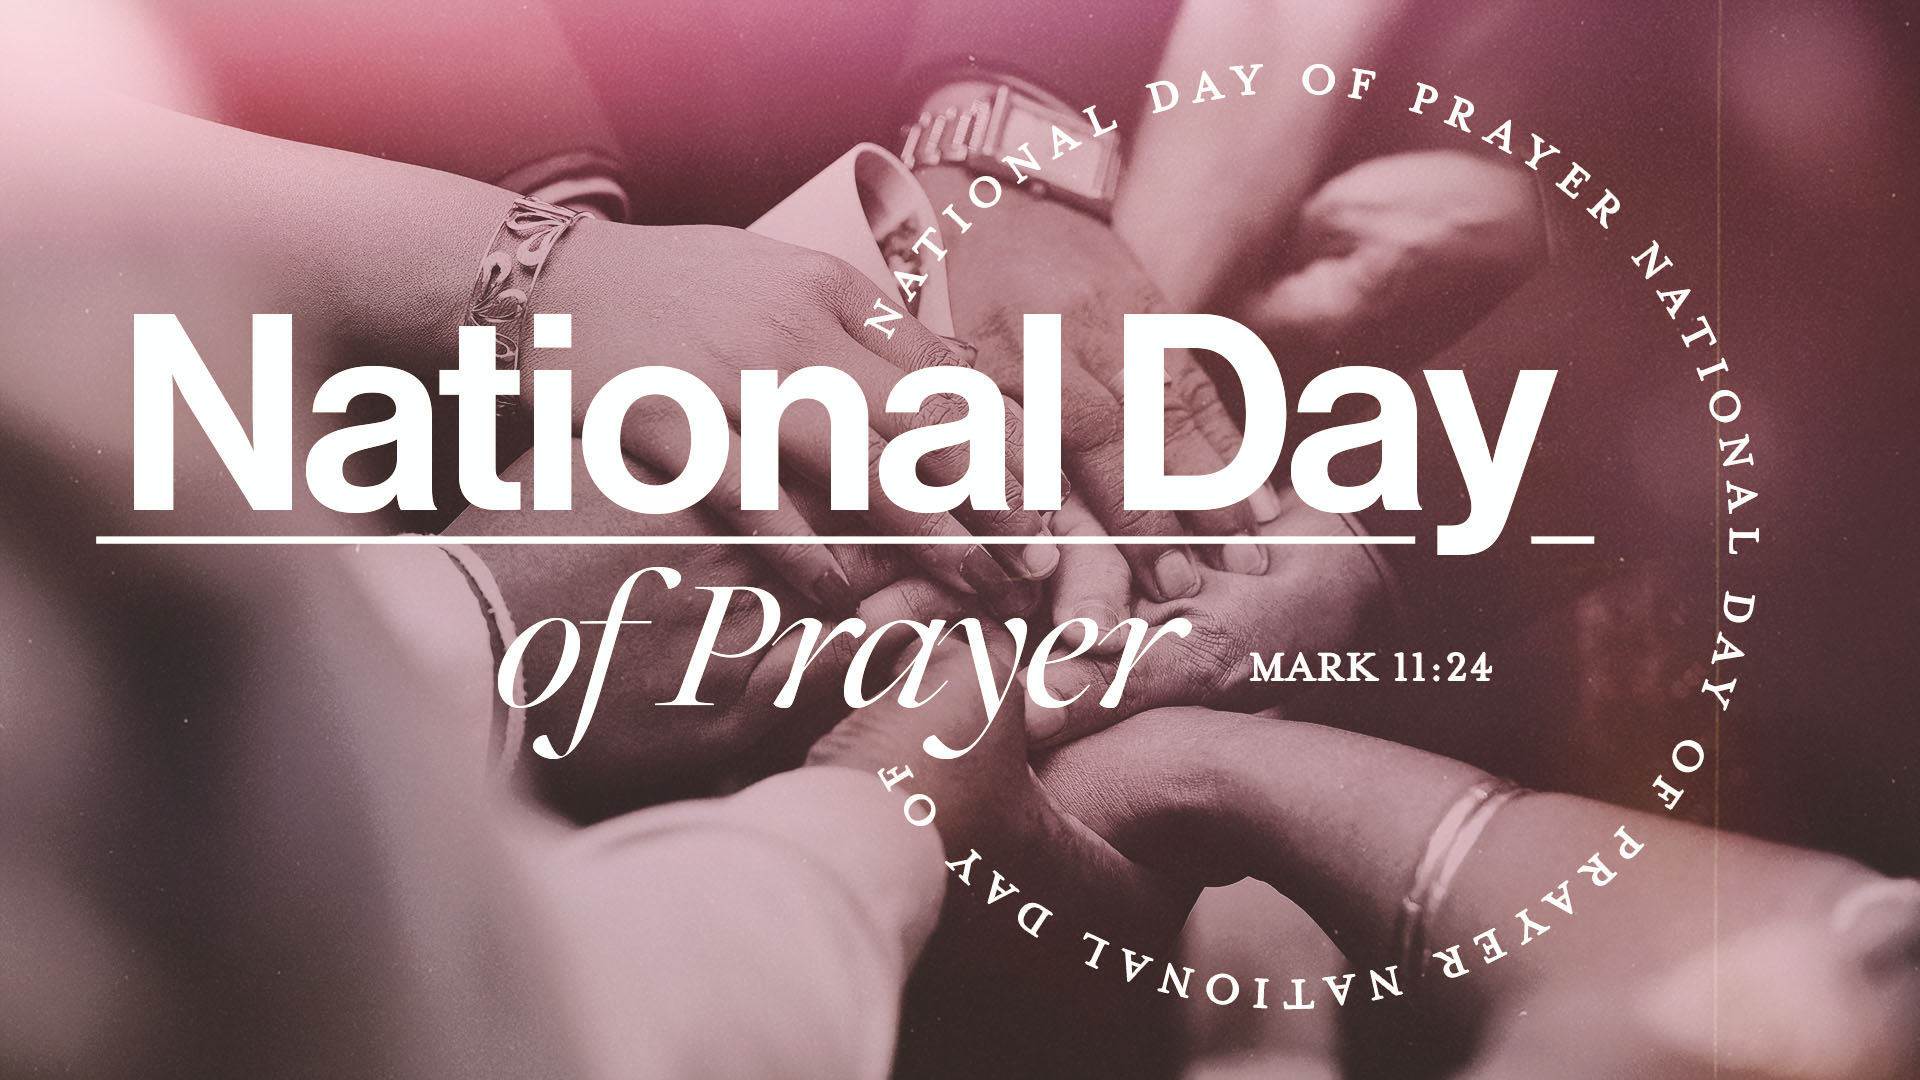 National Day of Prayer

Thursday | 6:00am, 11:00am, 5:00pm
May 2
